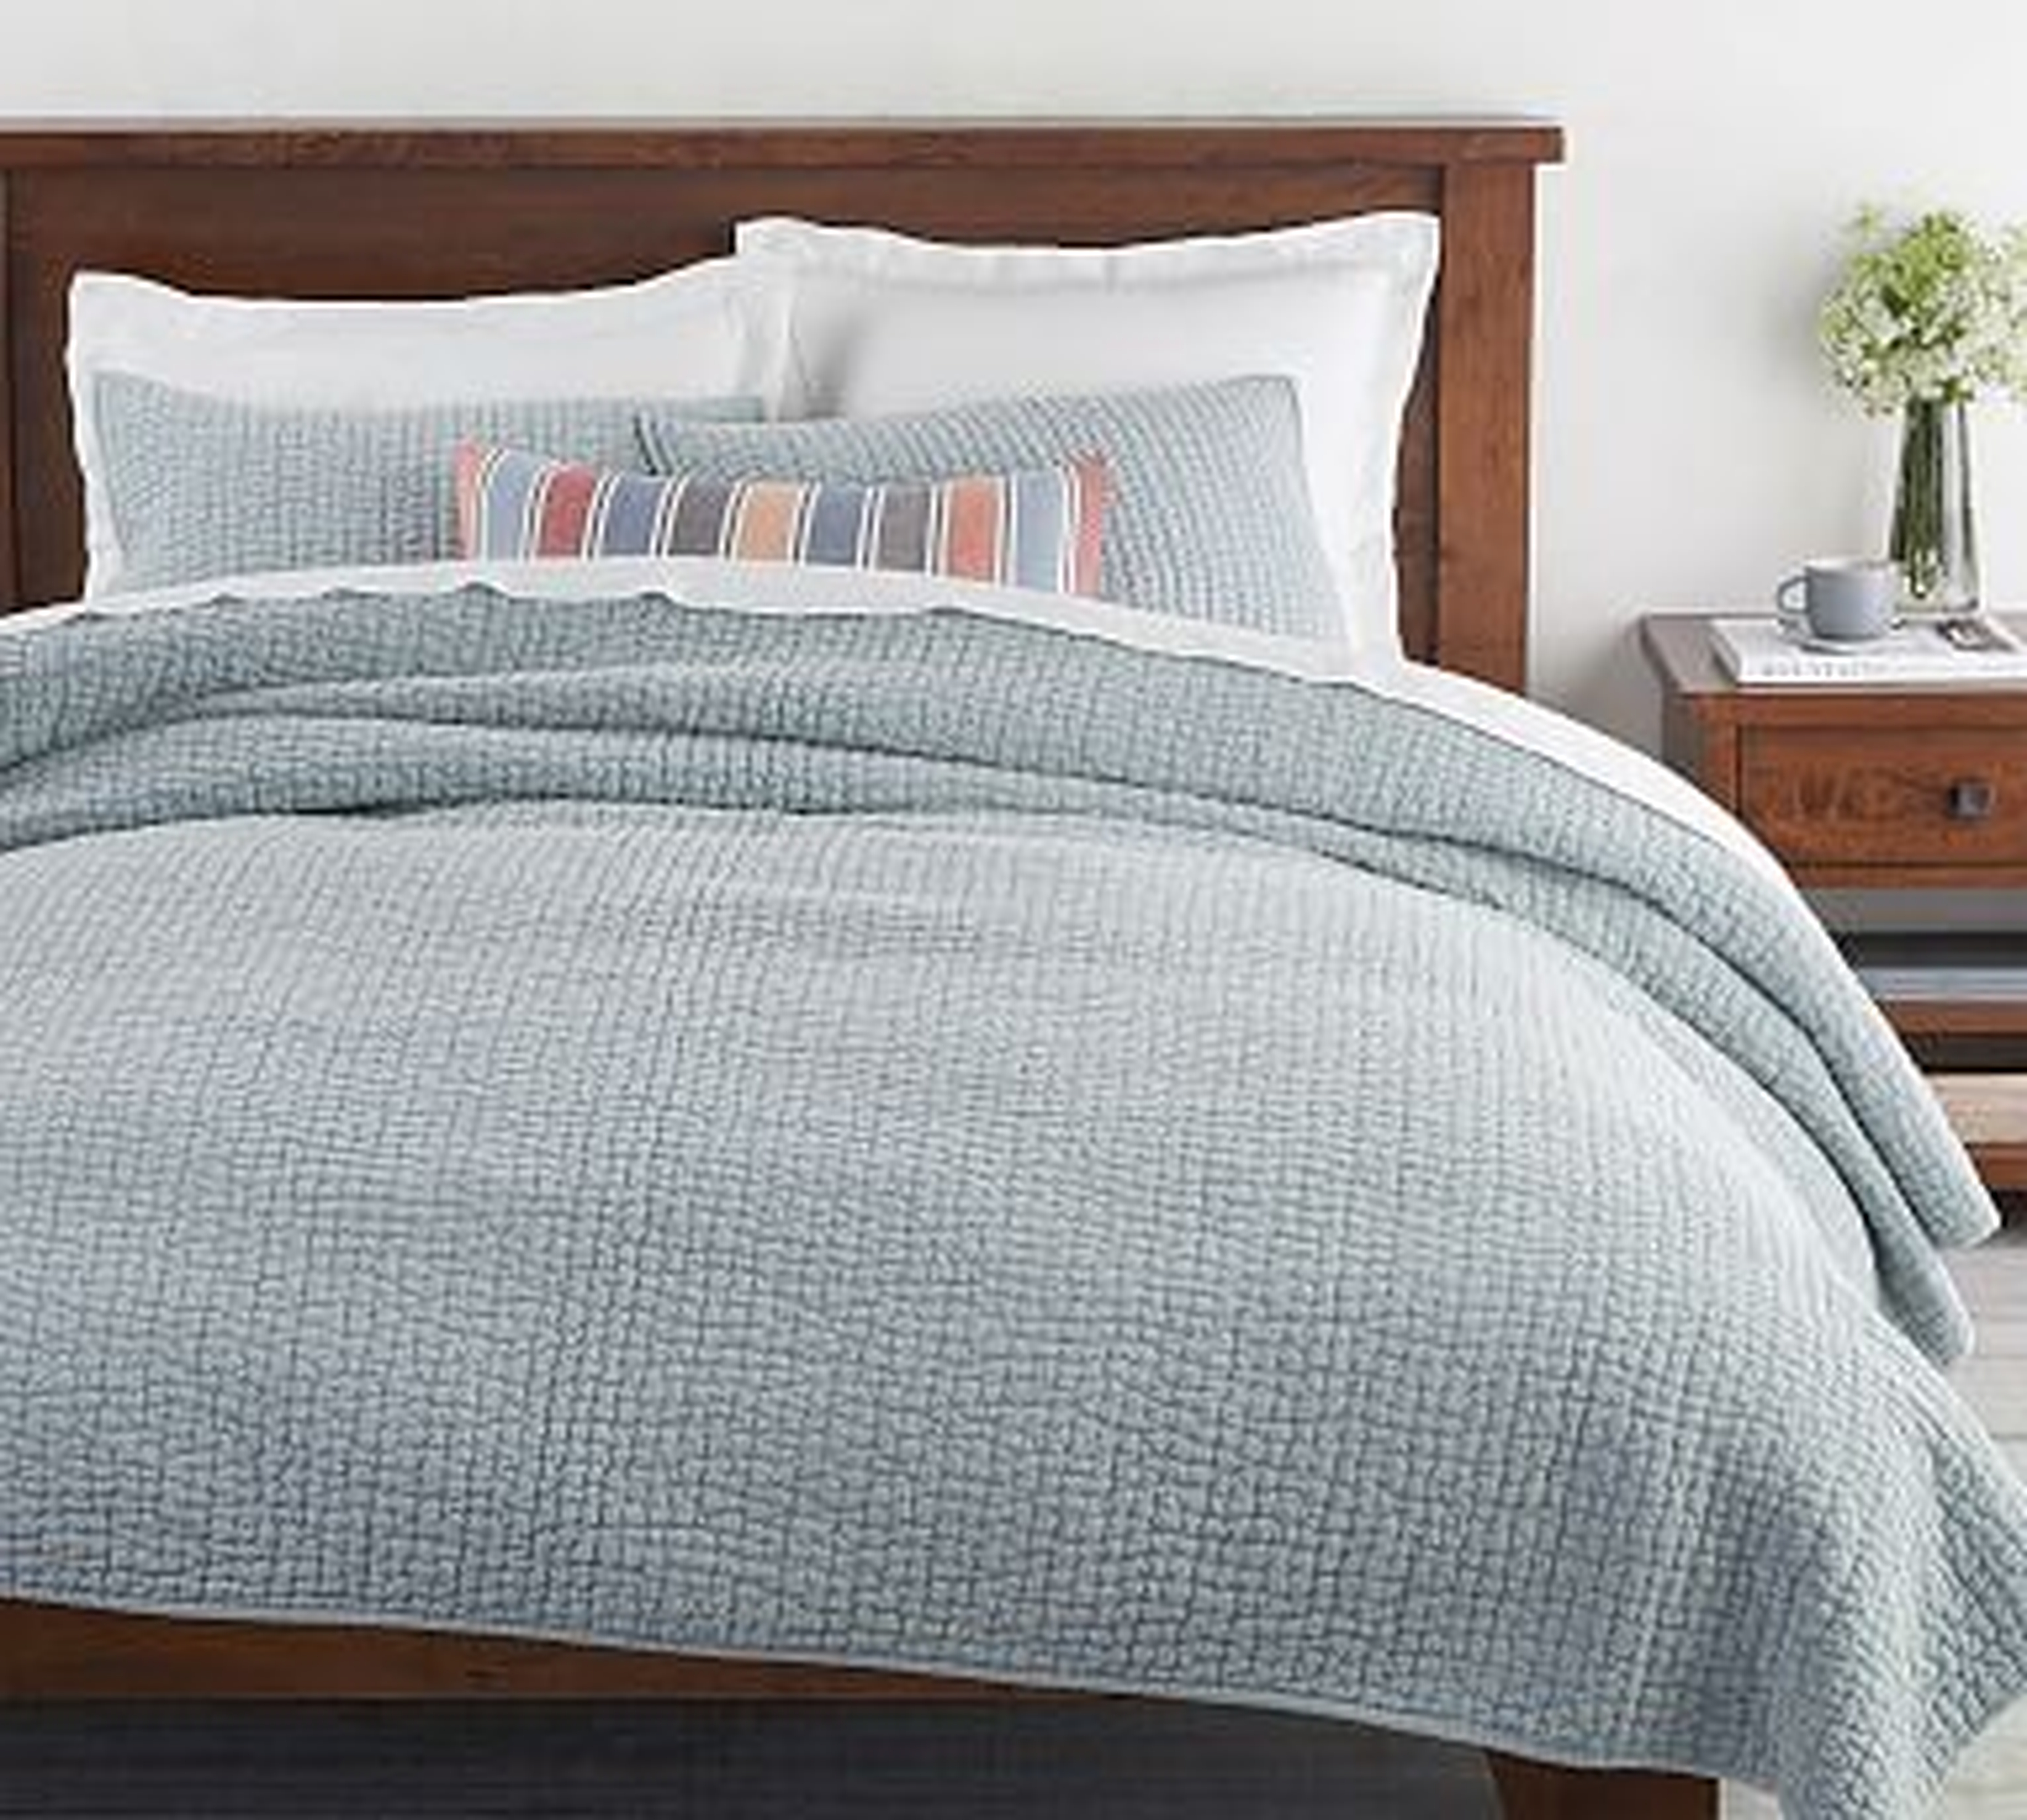 Stonewashed Pickstitch Cotton Quilt, King/Cal King, Sky Blue - Pottery Barn